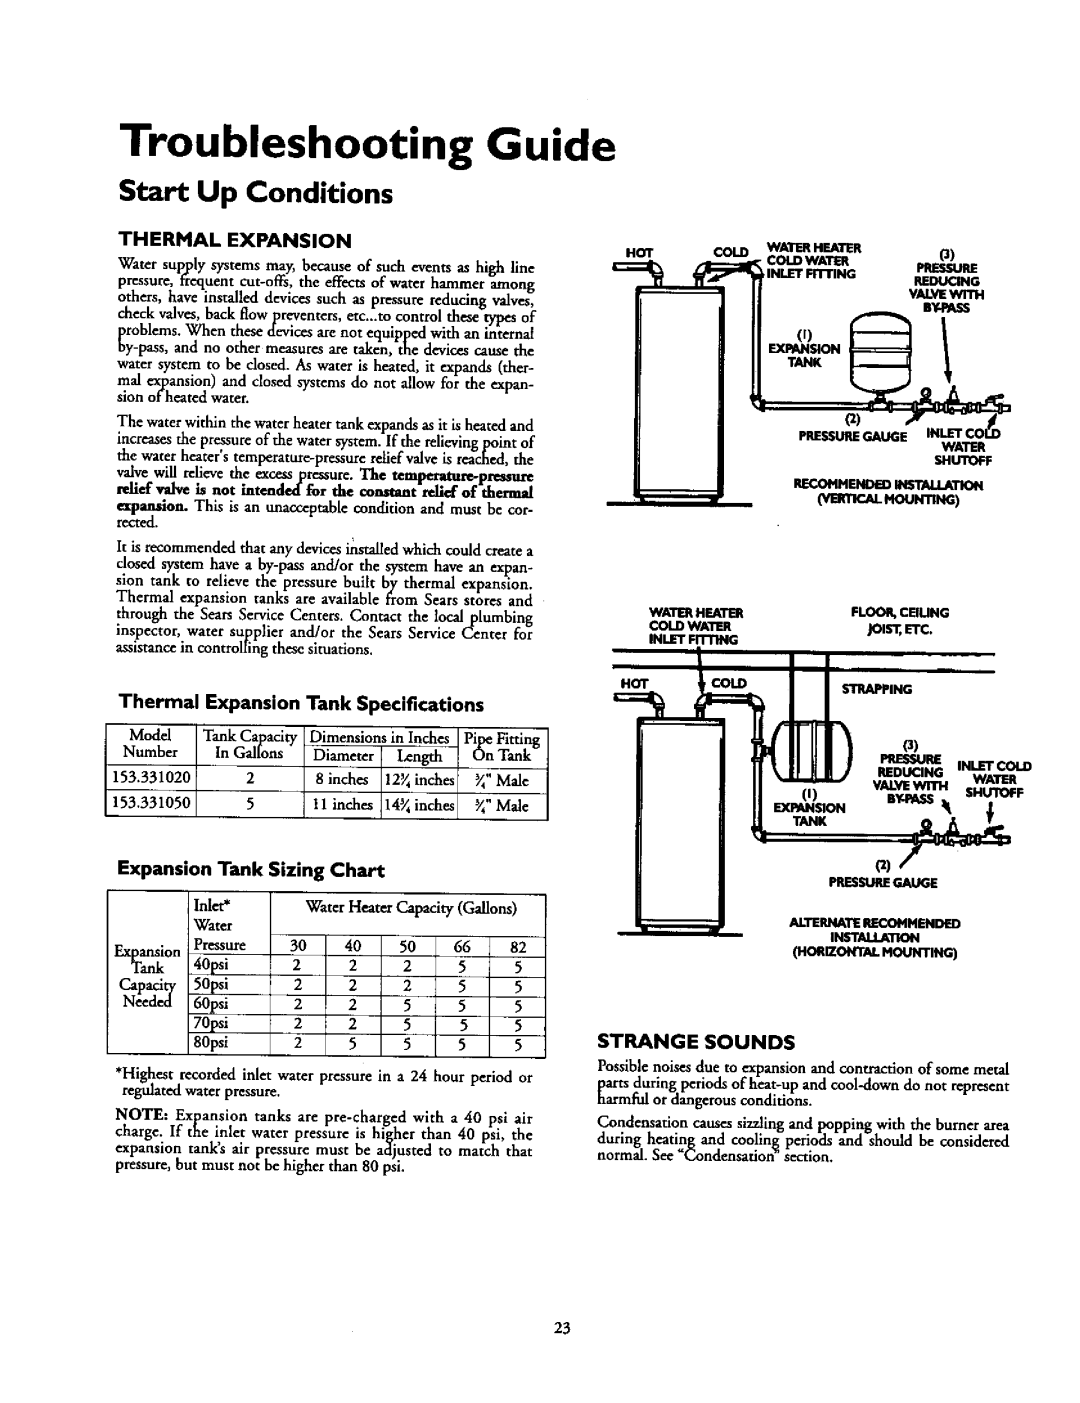 Kenmore 153.337662 Troubleshooting Guide, Start Up Conditions, Thermal Expansion Tank Specifications, Sizing, Chart 